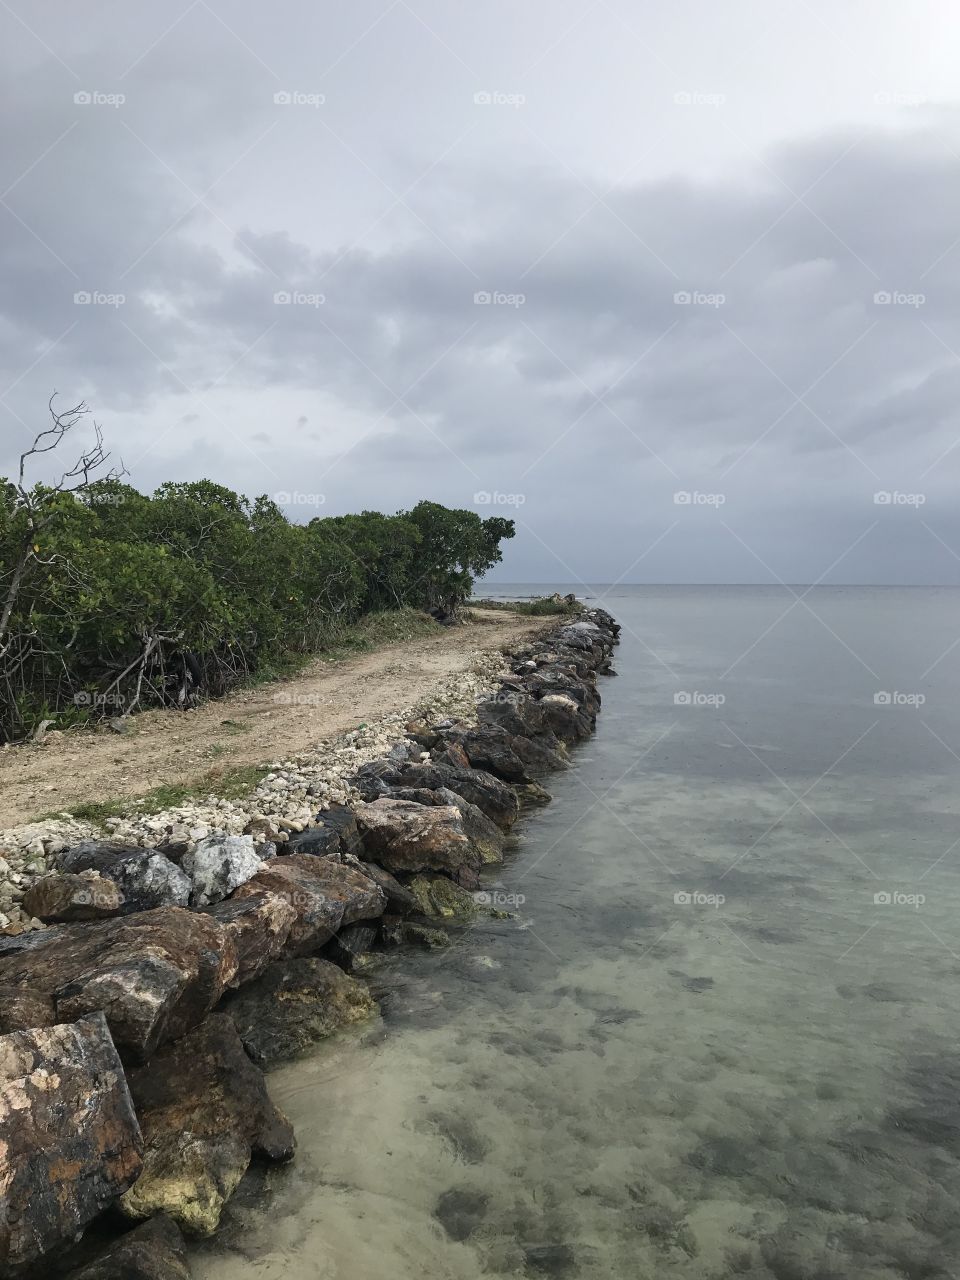 The coast of Roatan, Honduras on a stormy day. This photo was taken off a board walk while on vacation. 